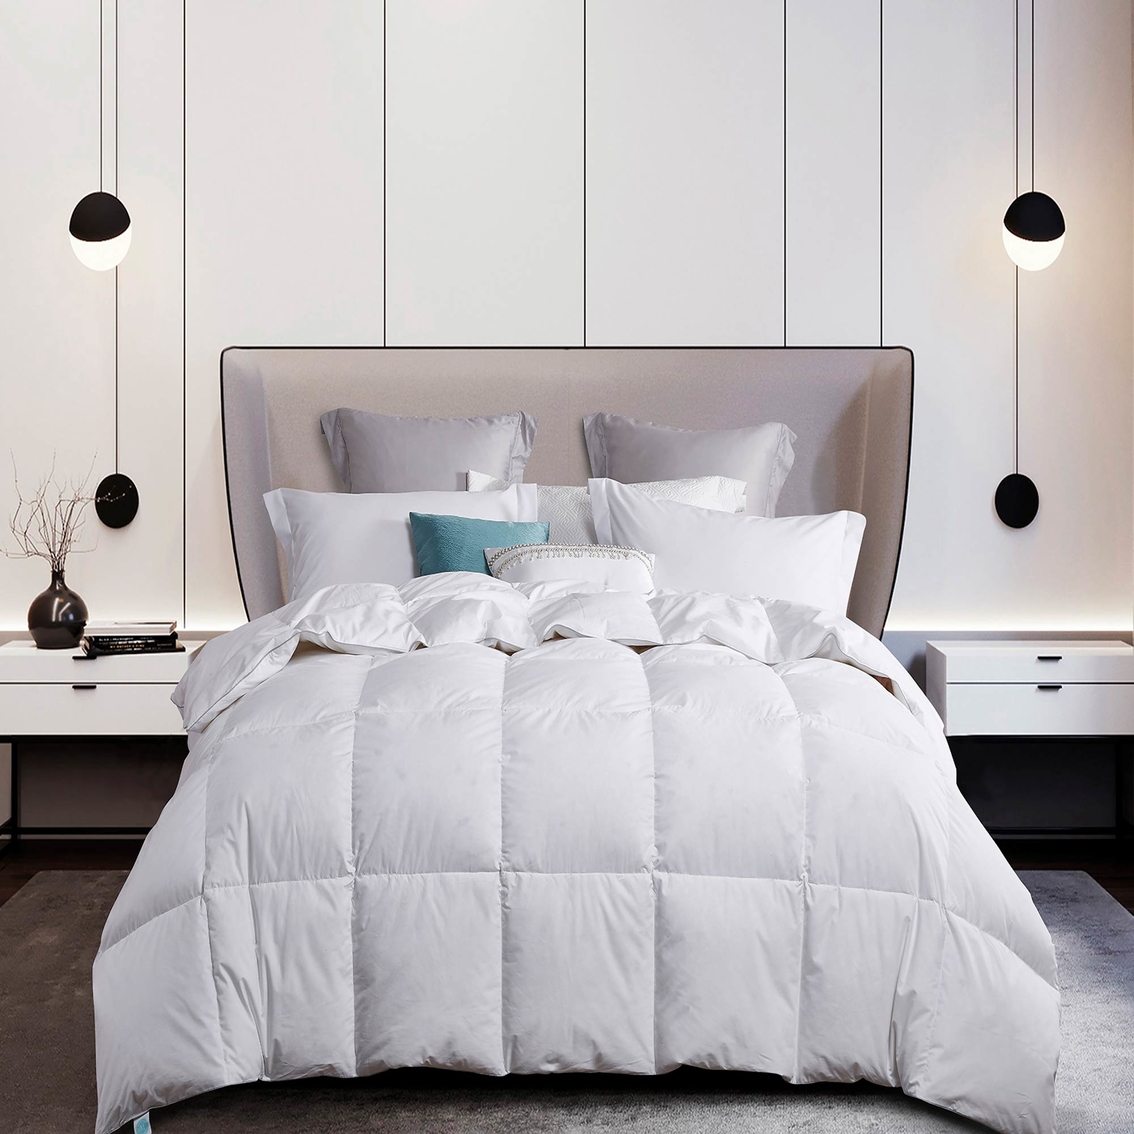 Martha Stewart Collection White Goose Down and Feather Comforter - Image 1 of 4